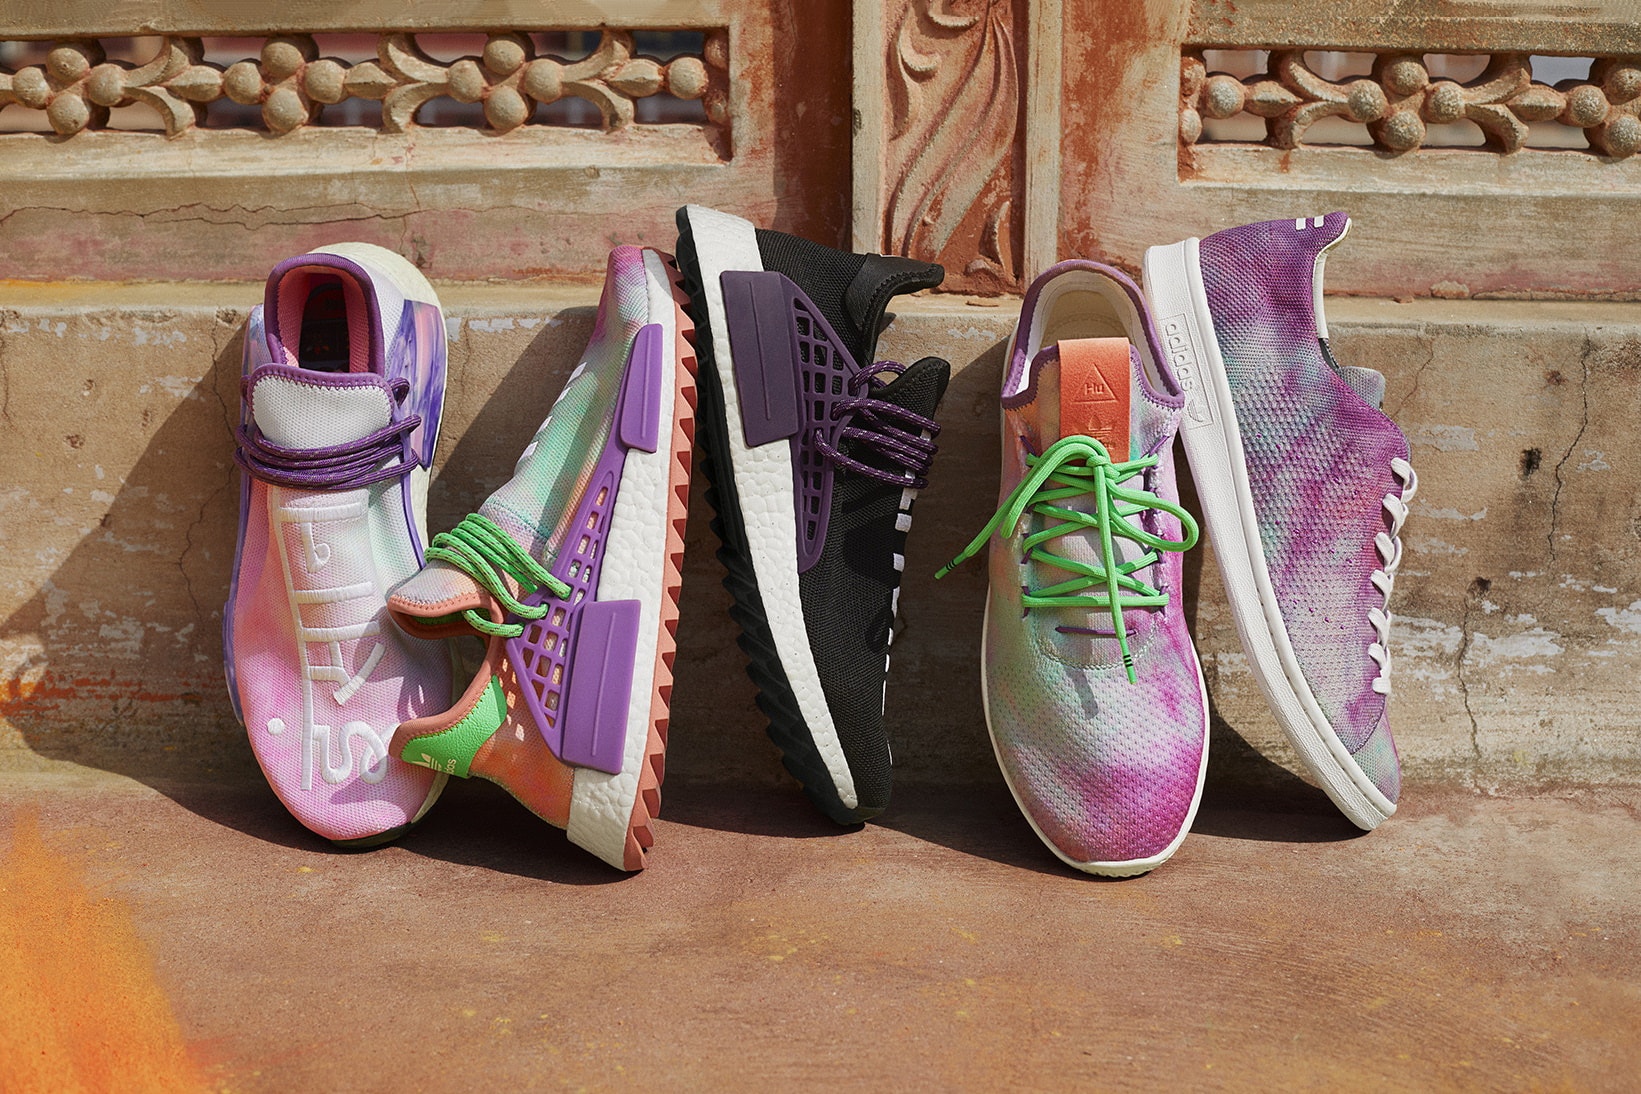 adidas originals by Pharrell Williams announce now is her time